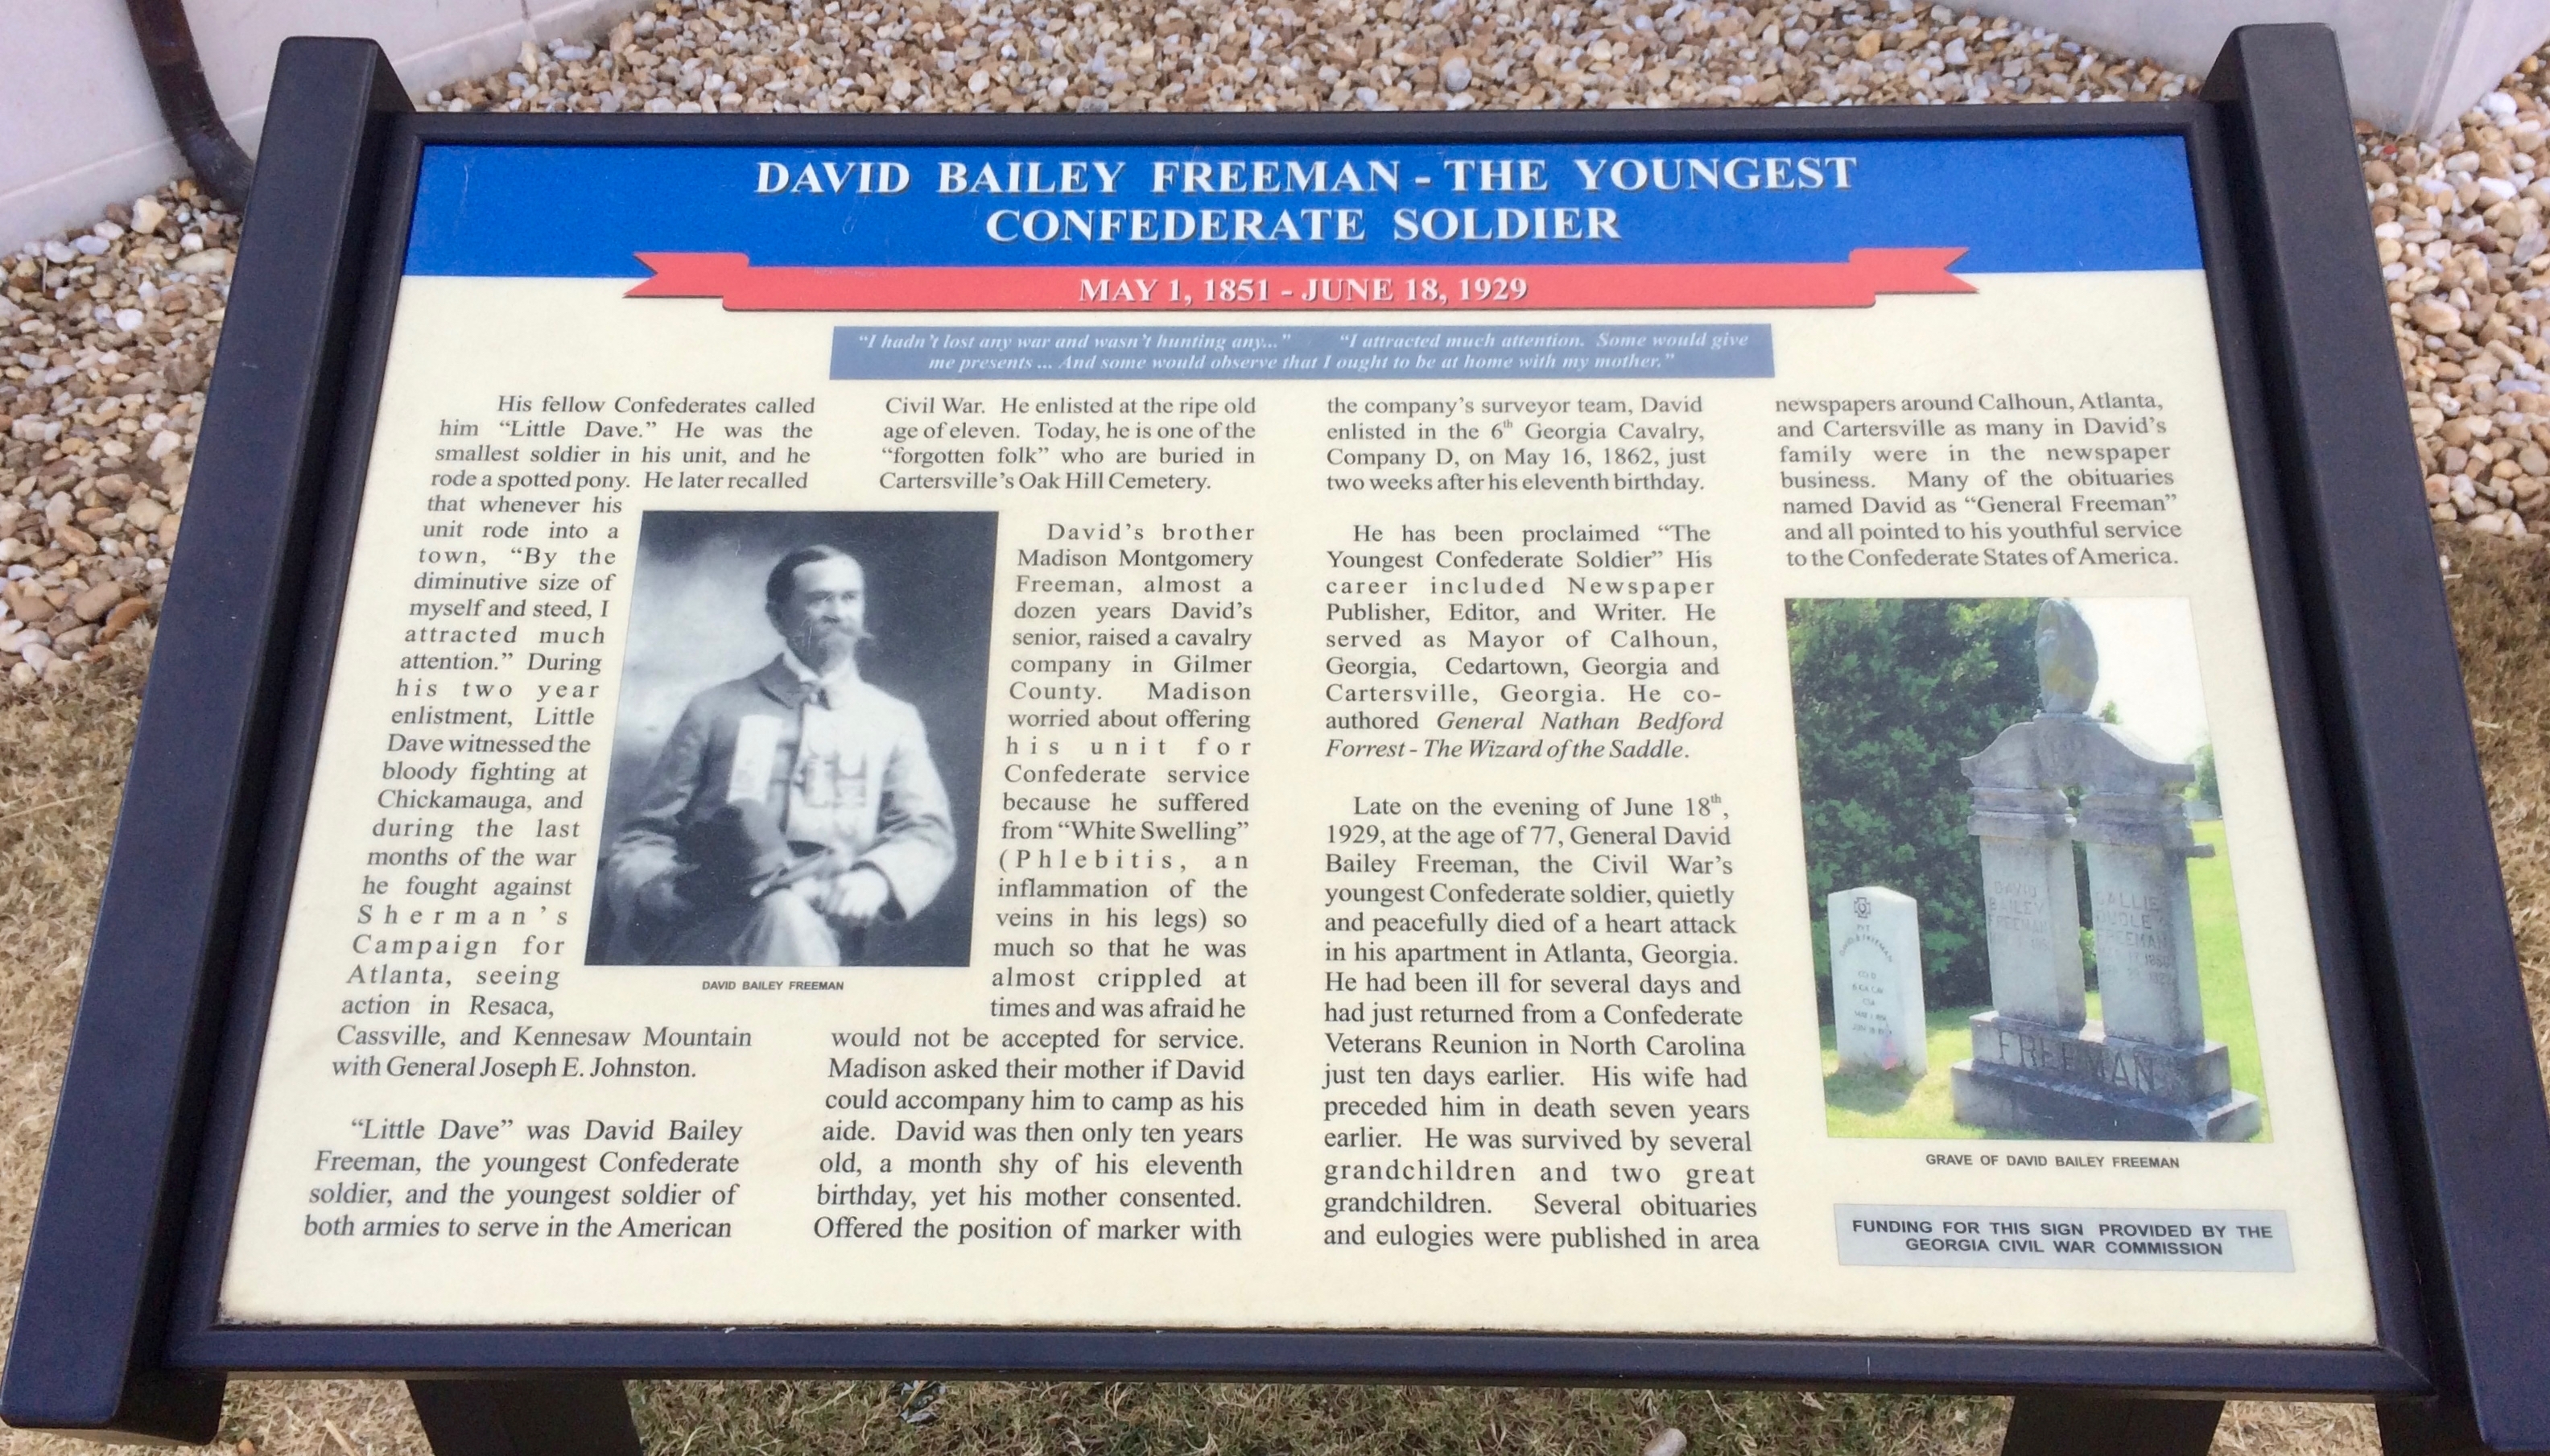 David Bailey Freeman - The Youngest Confederate Soldier Marker